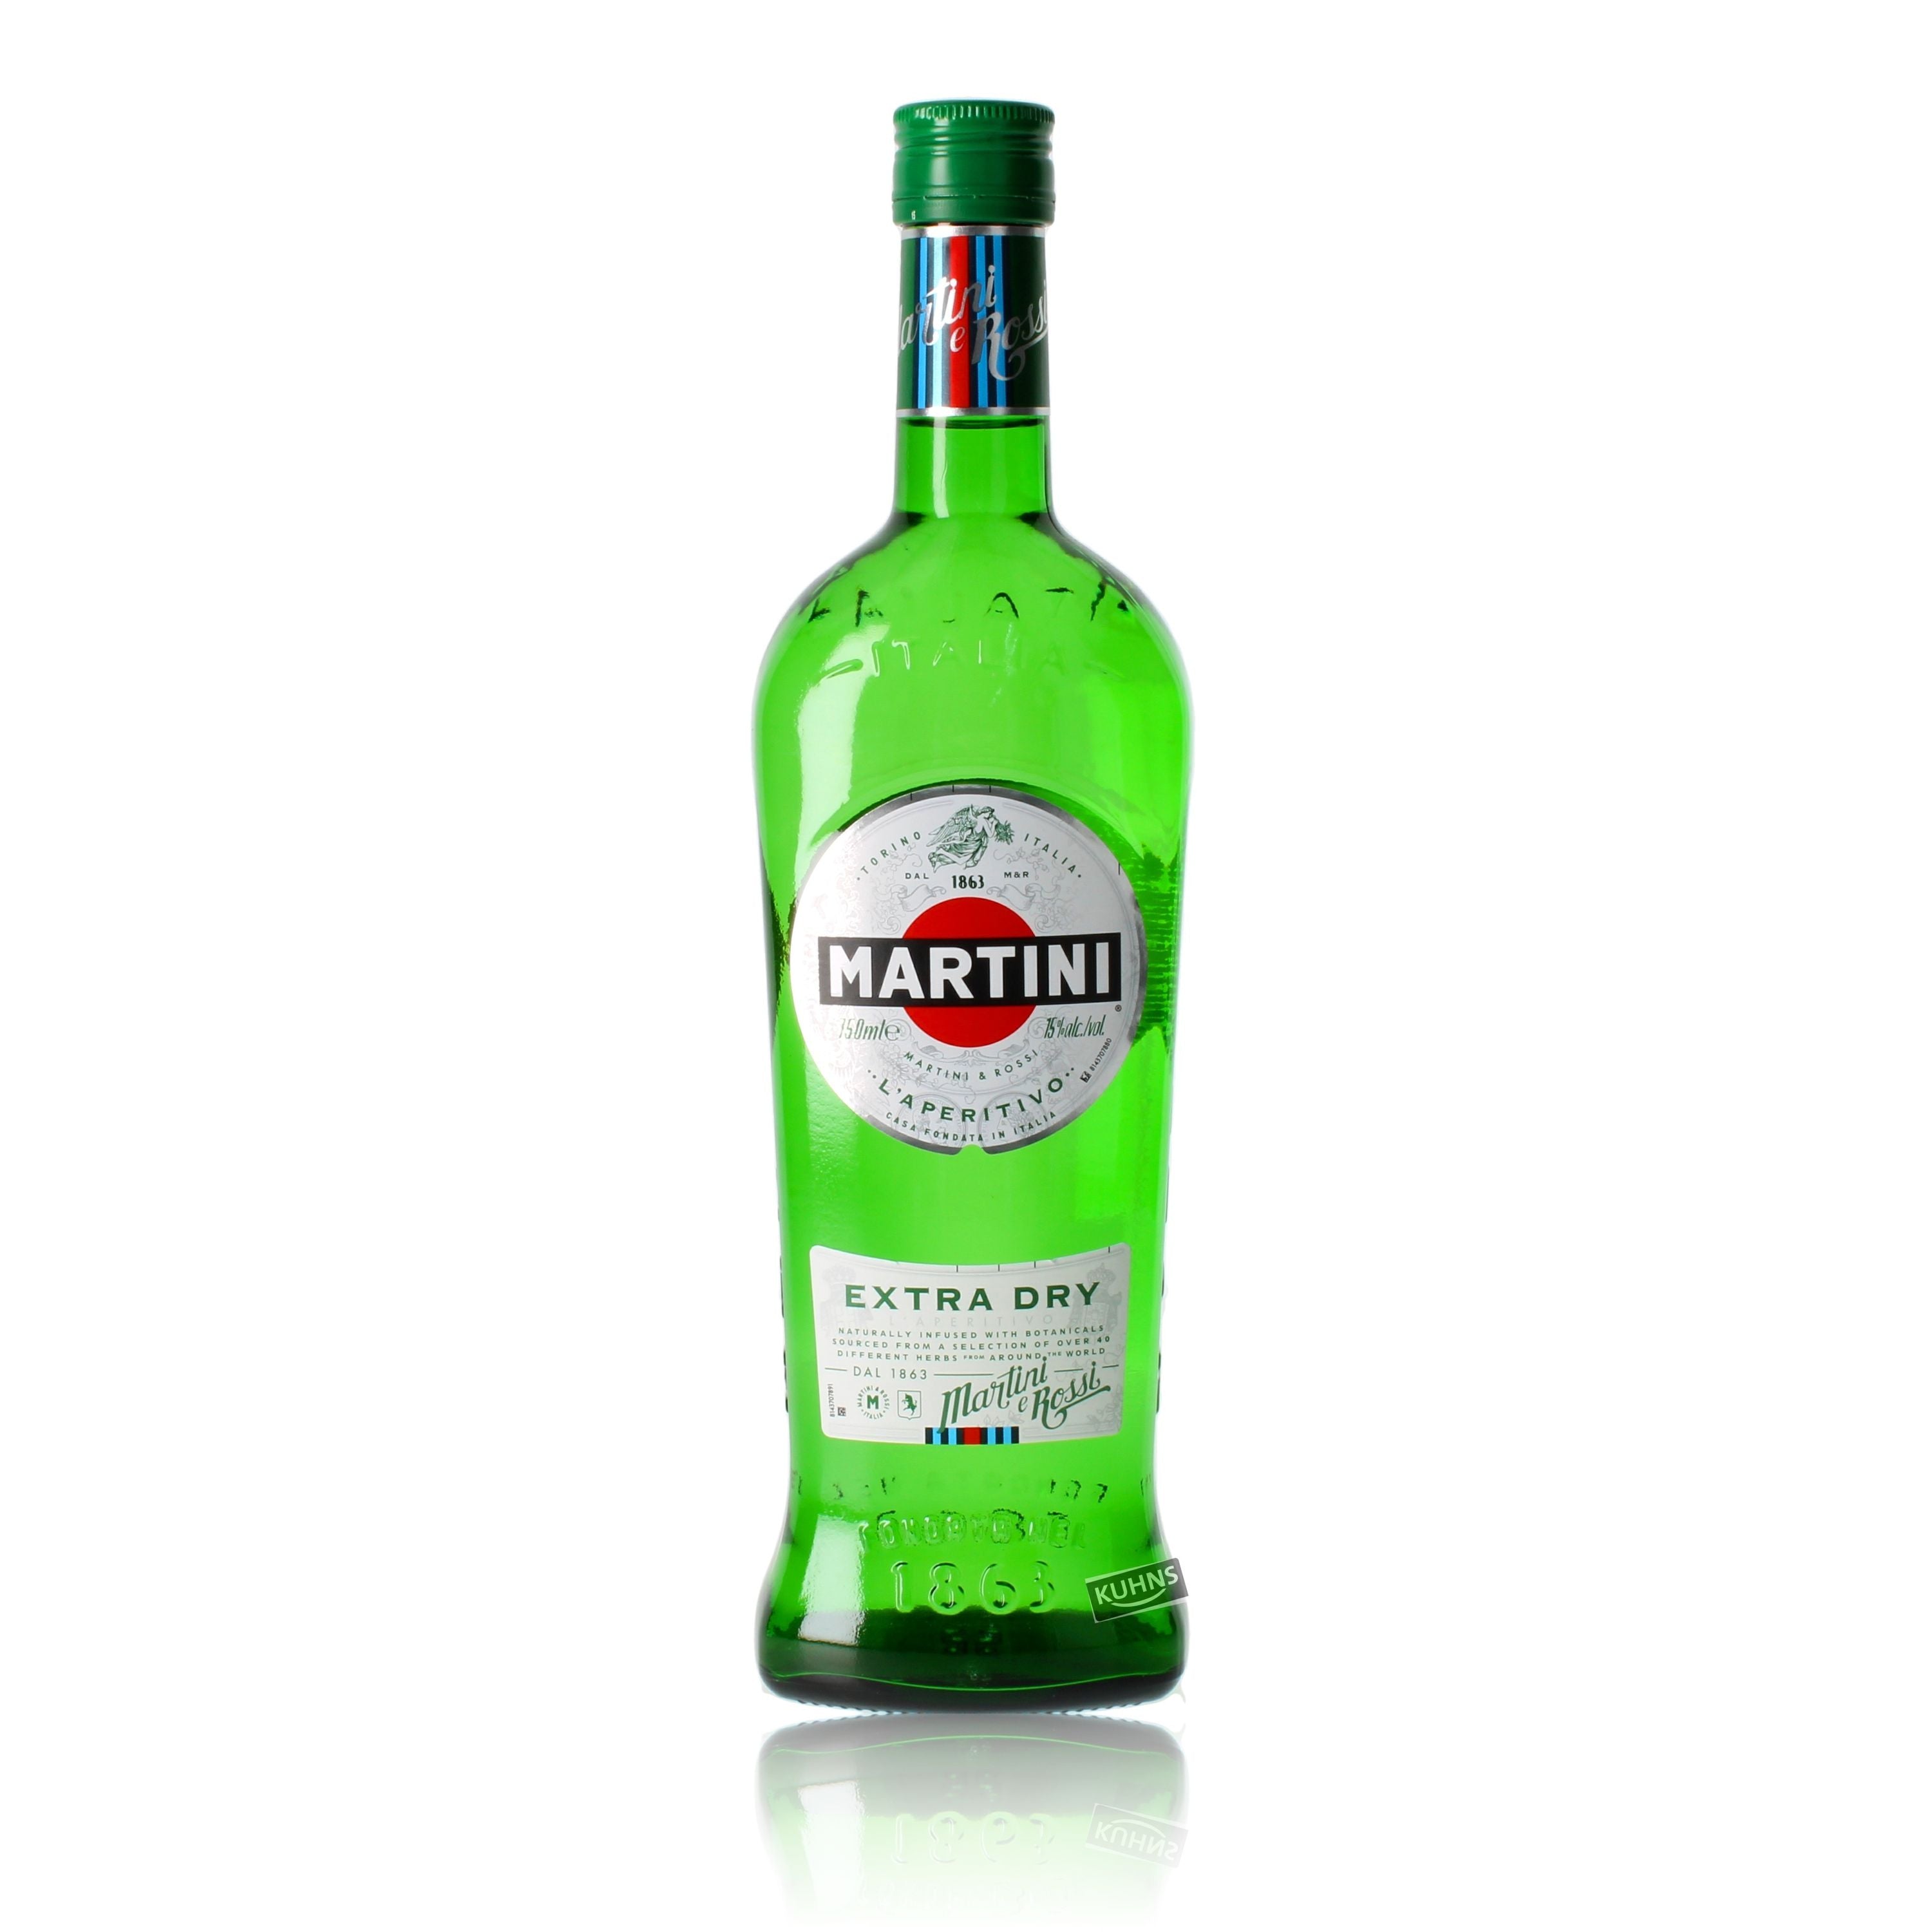 Martini Extra Dry 0.75l, alc. 15% by volume wormwood